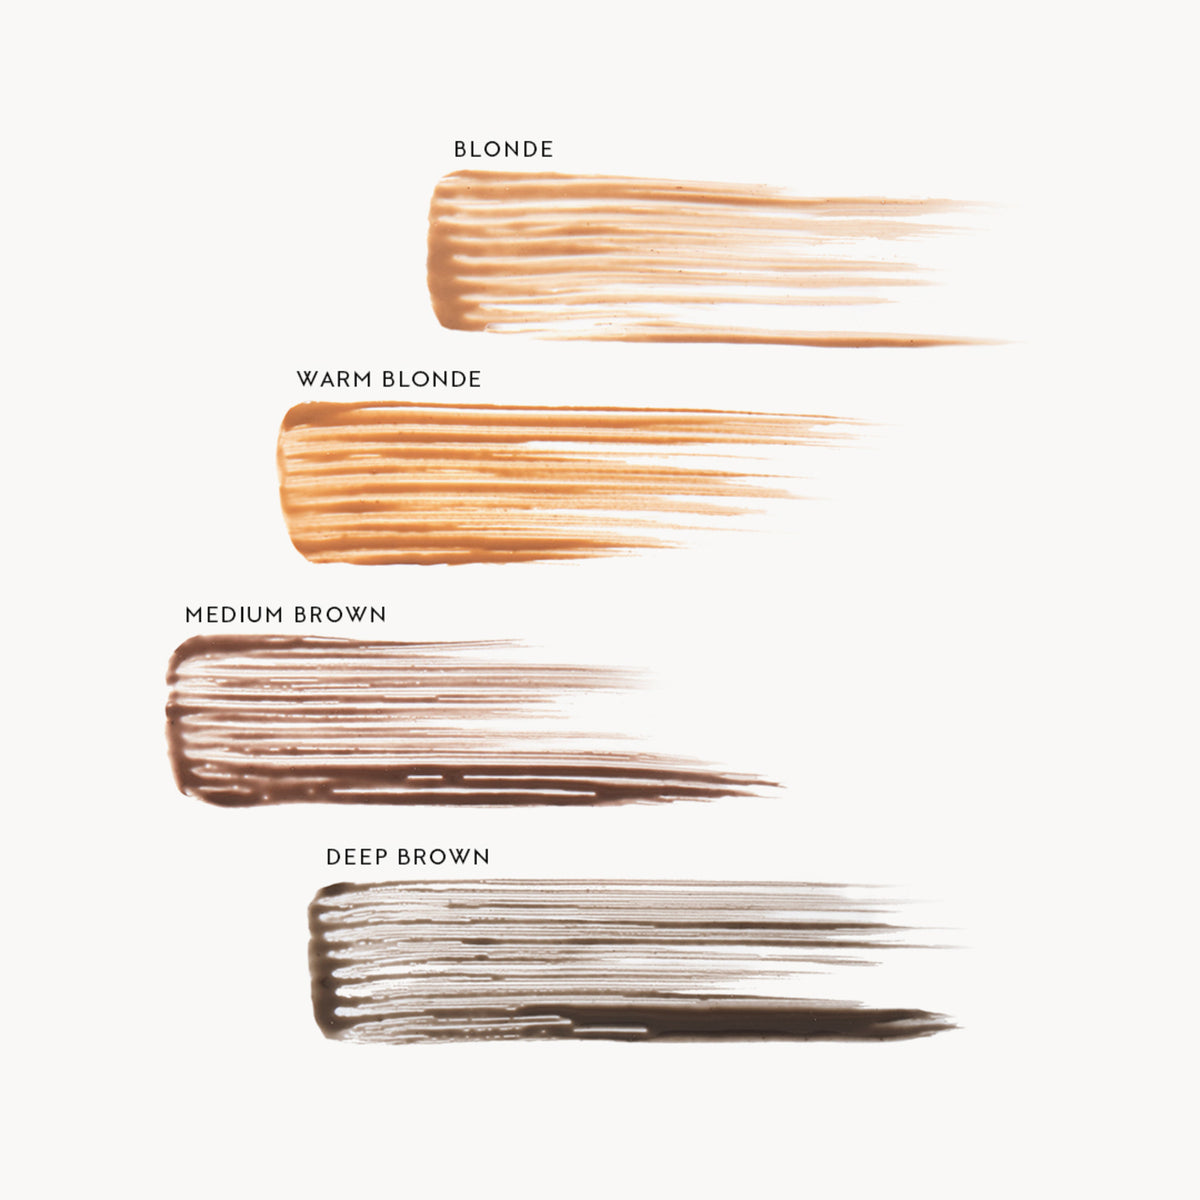 Kjaer Weis FeatherTouch Brow Gel . This product is in the color brown